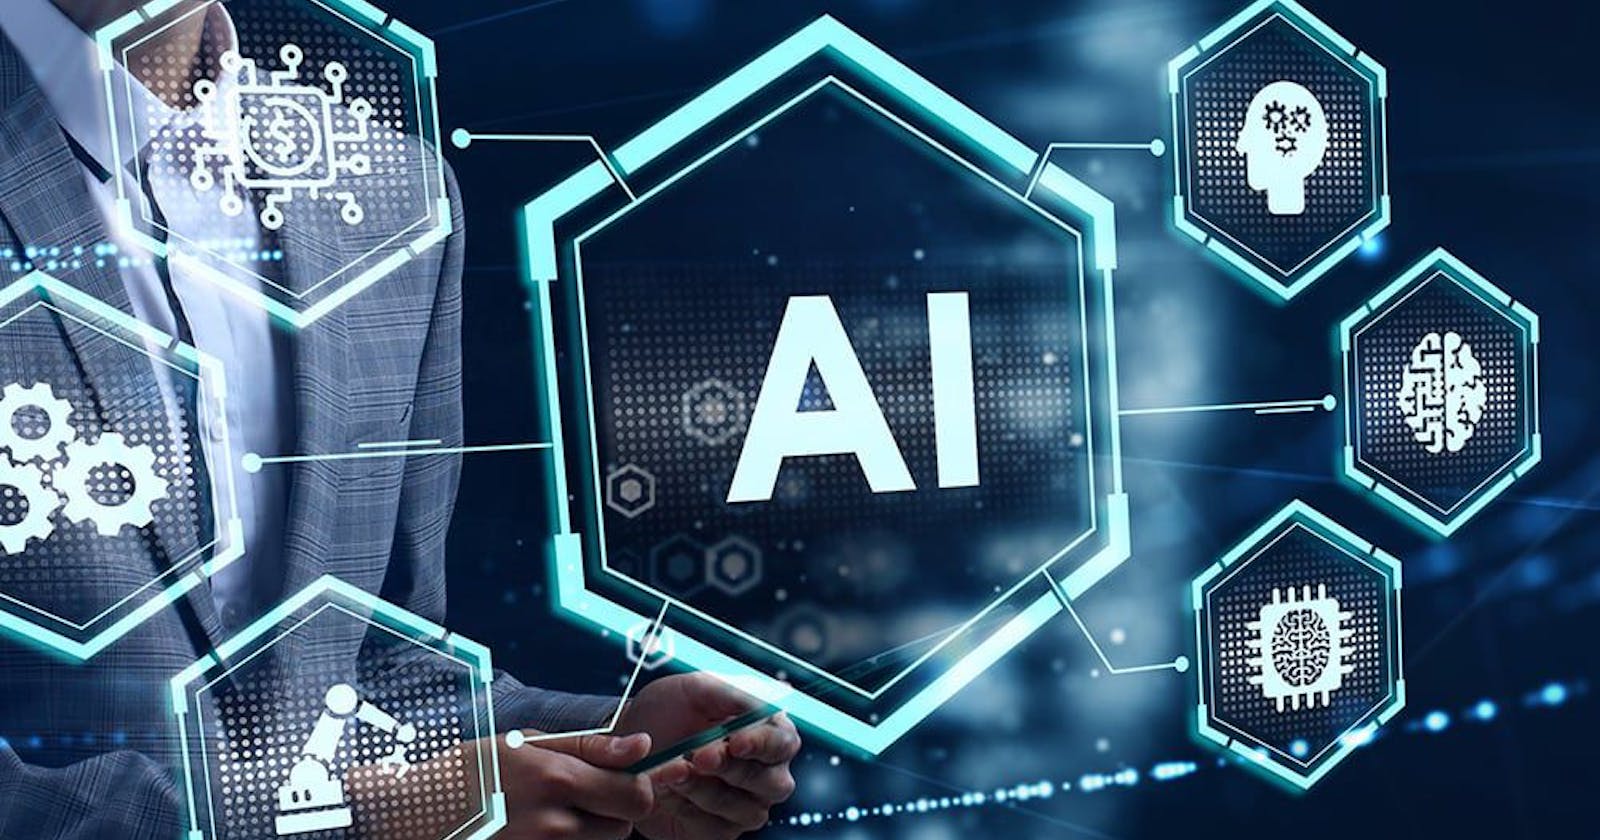 What are the key considerations when choosing an AI development platform for a project?